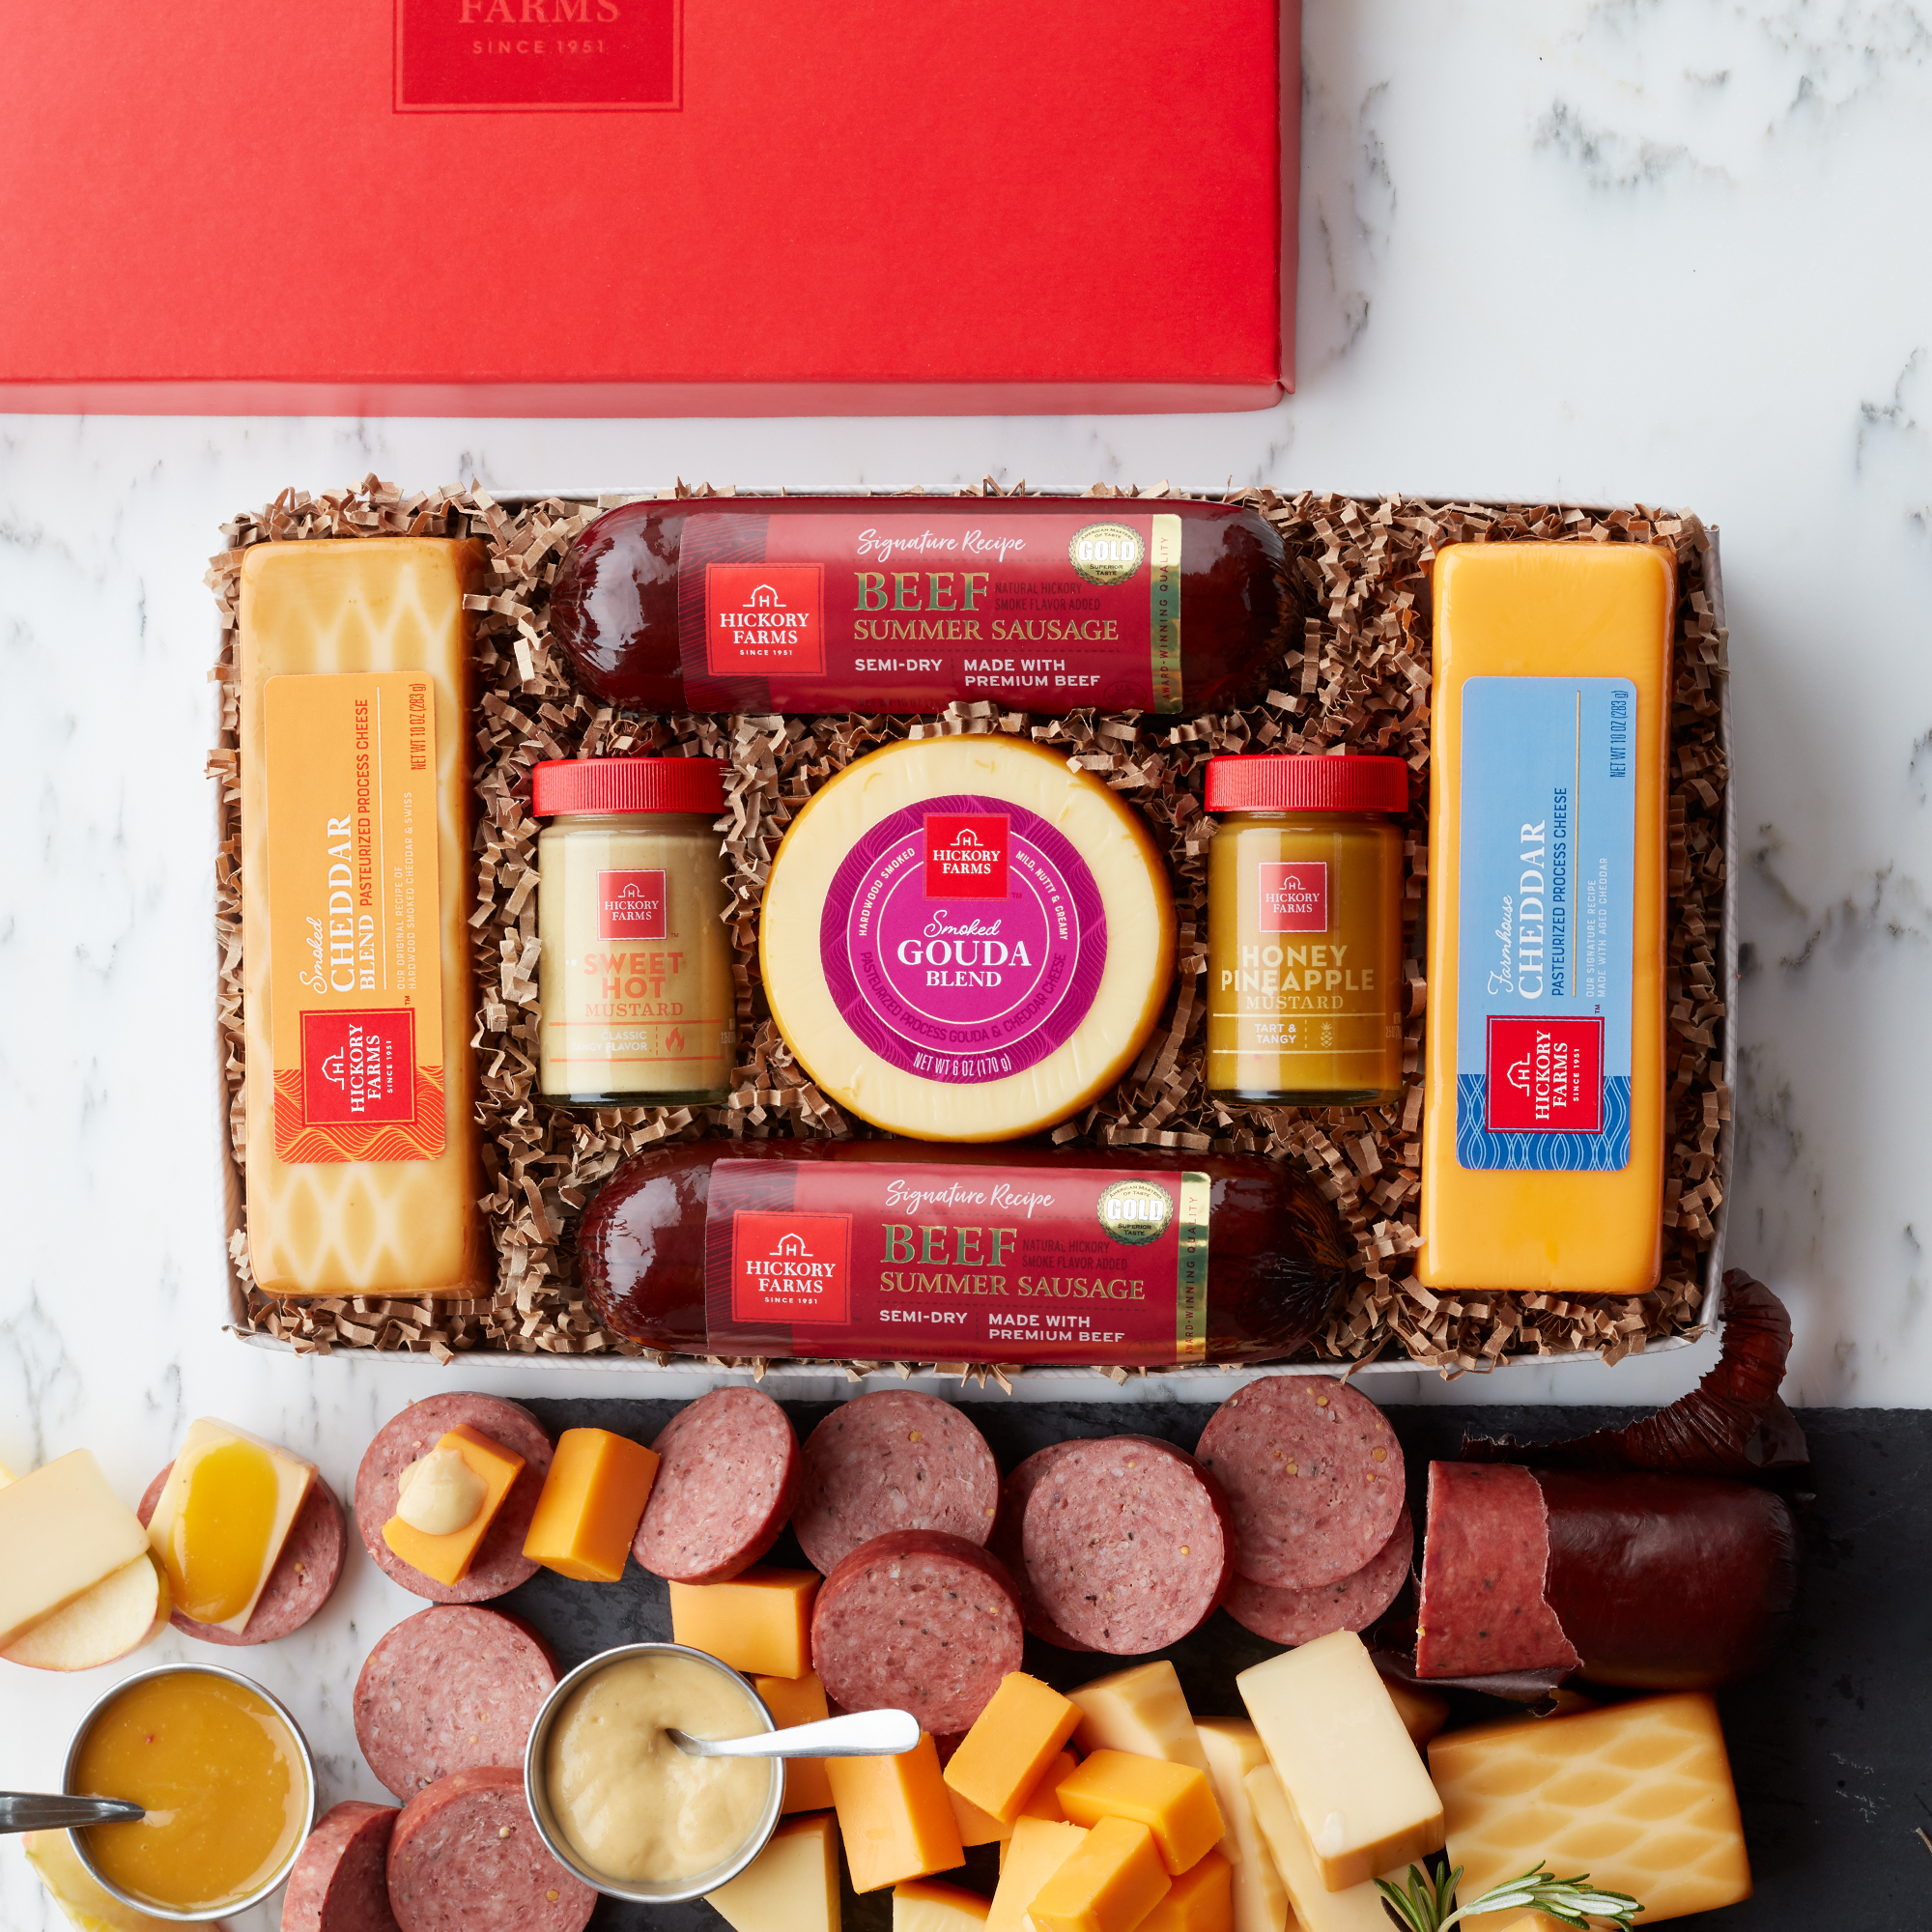 https://www.hickoryfarms.com/on/demandware.static/-/Sites-Web-Master-Catalog/default/dwf8672c4e/images/products/summer-sausage-cheese-gift-box-26-1.jpg